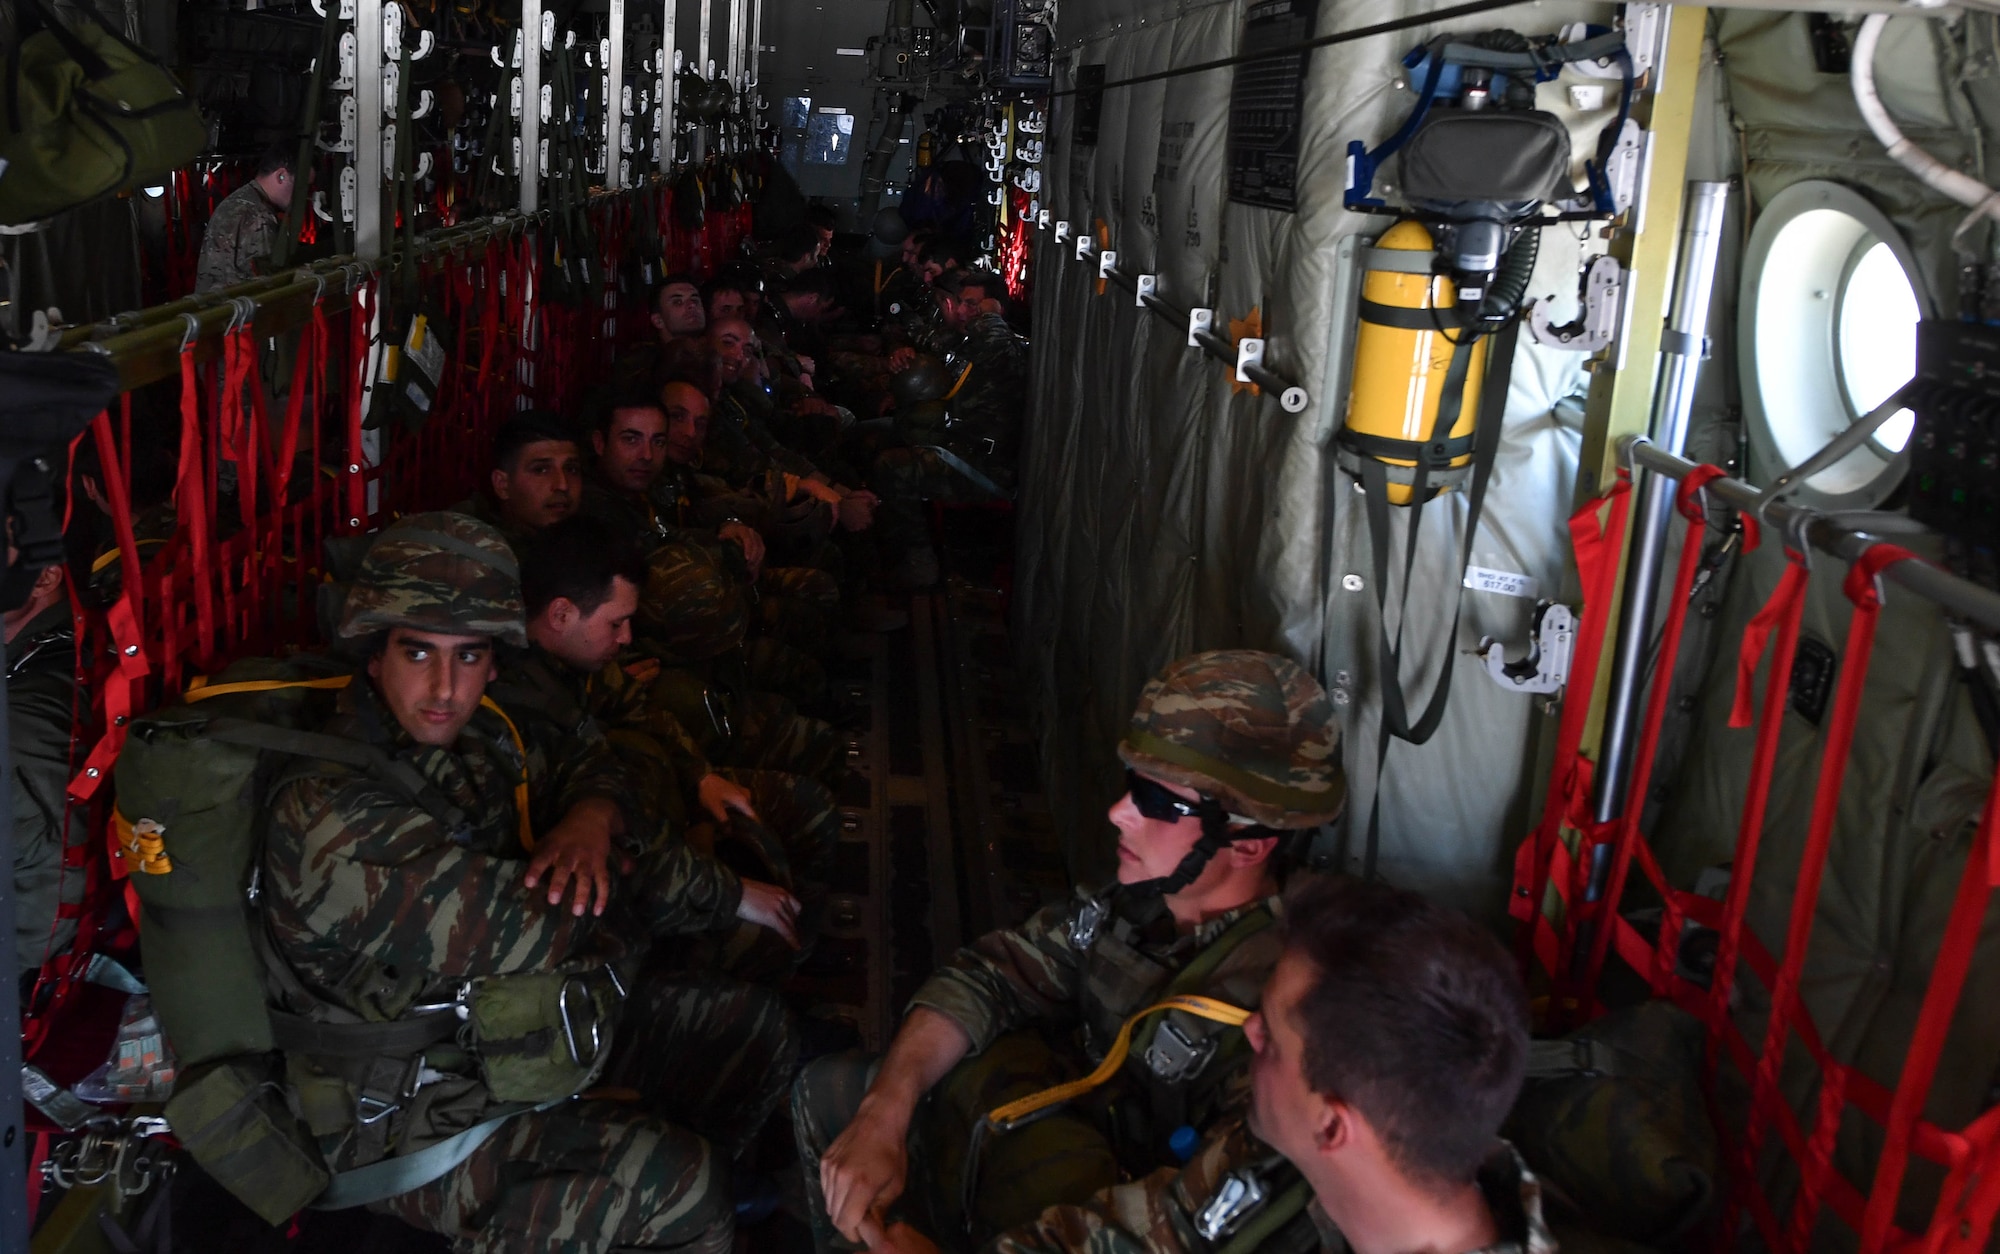 Greek paratroopers sit inside a U.S. Air Force C-130J Super Hercules during Exercise Stolen Cerberus IV at Elefsis Air Base, Greece, April 26, 2017. Approximately 40 paratroopers performed static-line and military free-fall jumps from the C-130. Combined exercises such as these enhance the interoperability capabilities and skills among allied and partner armed forces. (U.S Air Force photo by Senior Airman Tryphena Mayhugh)